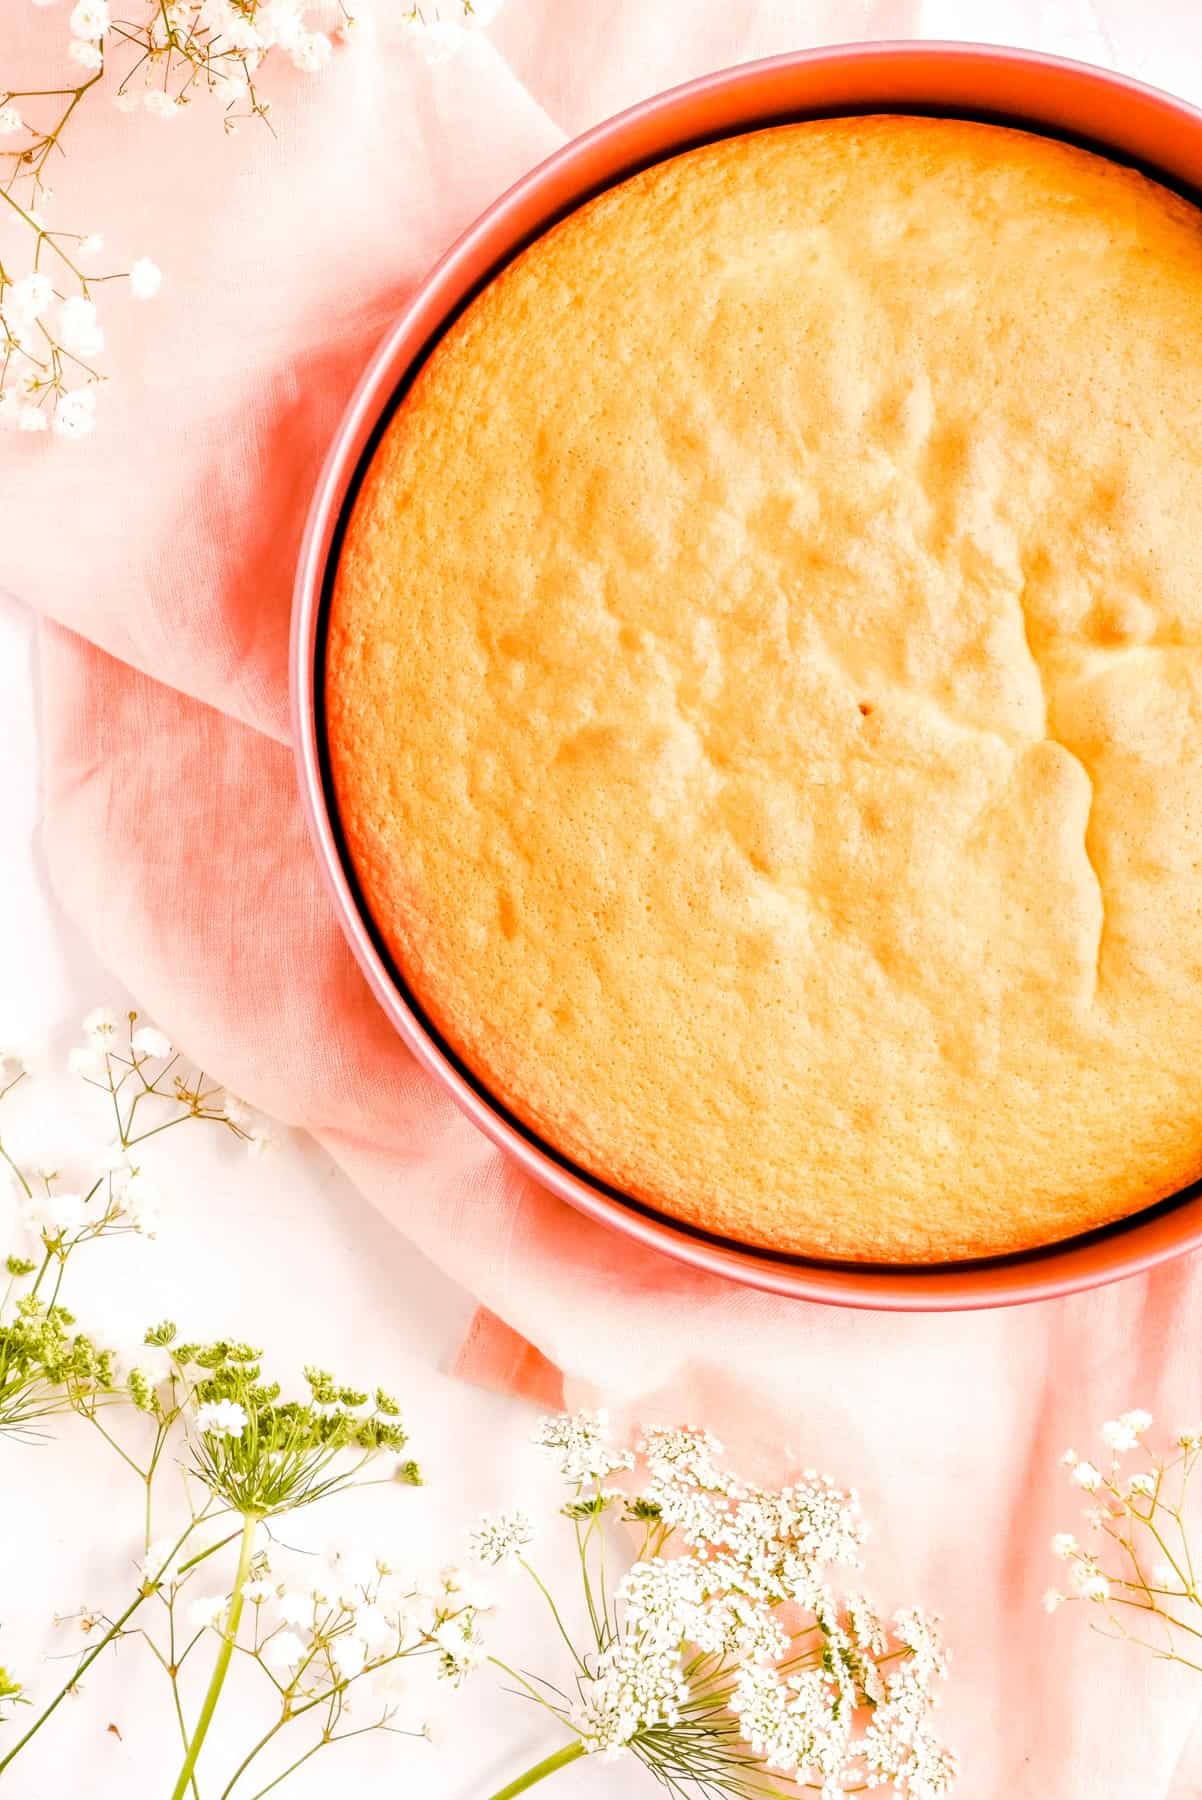 a fully baked genoise sponge cake still in its pink pan on a pink towel with flowers on the table.